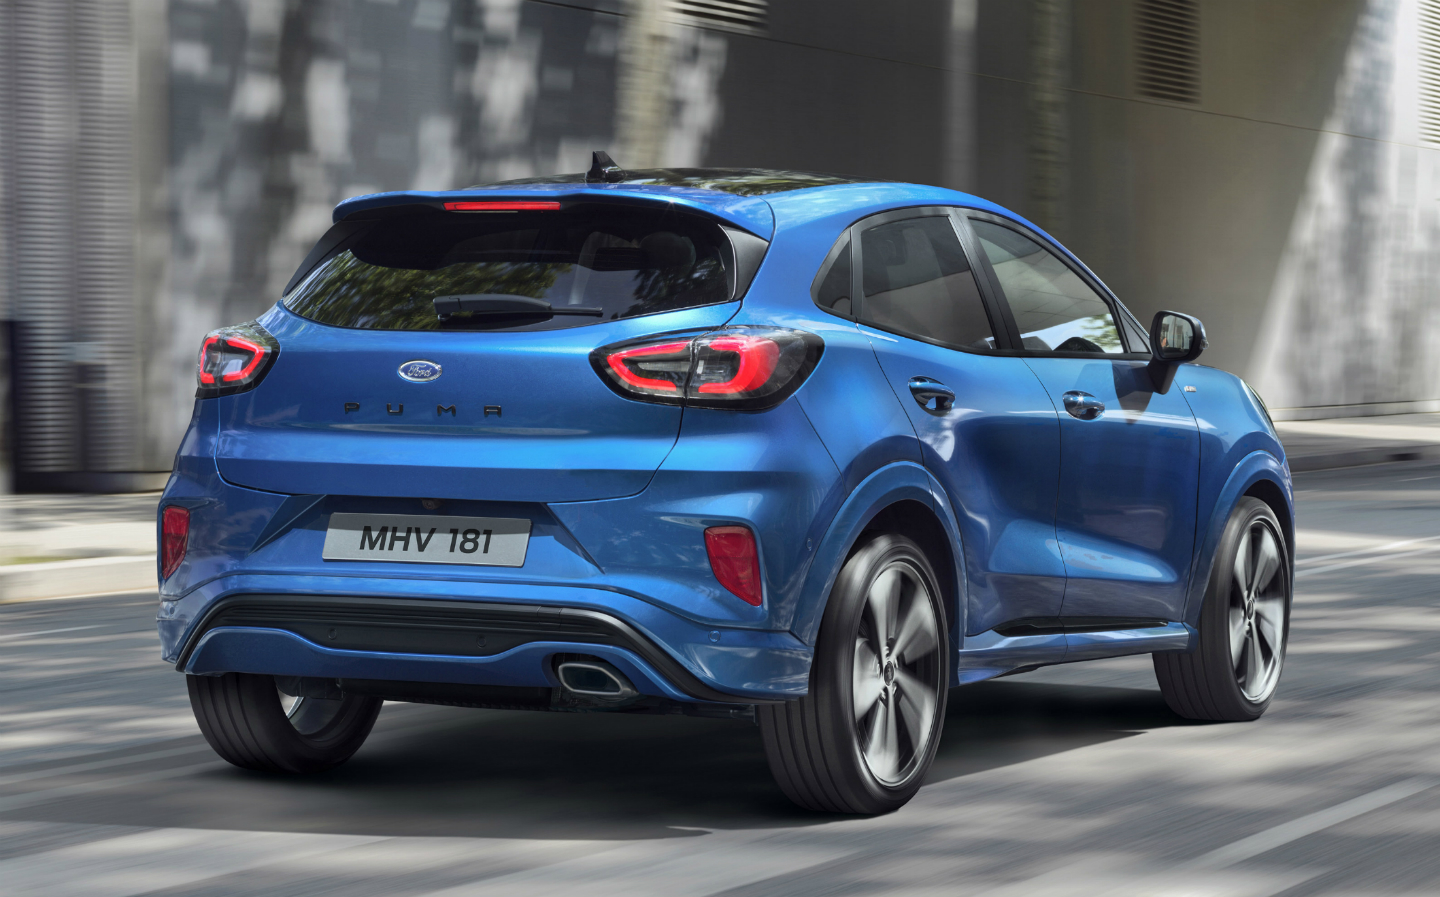 2020 Ford Puma: prices, engines, release